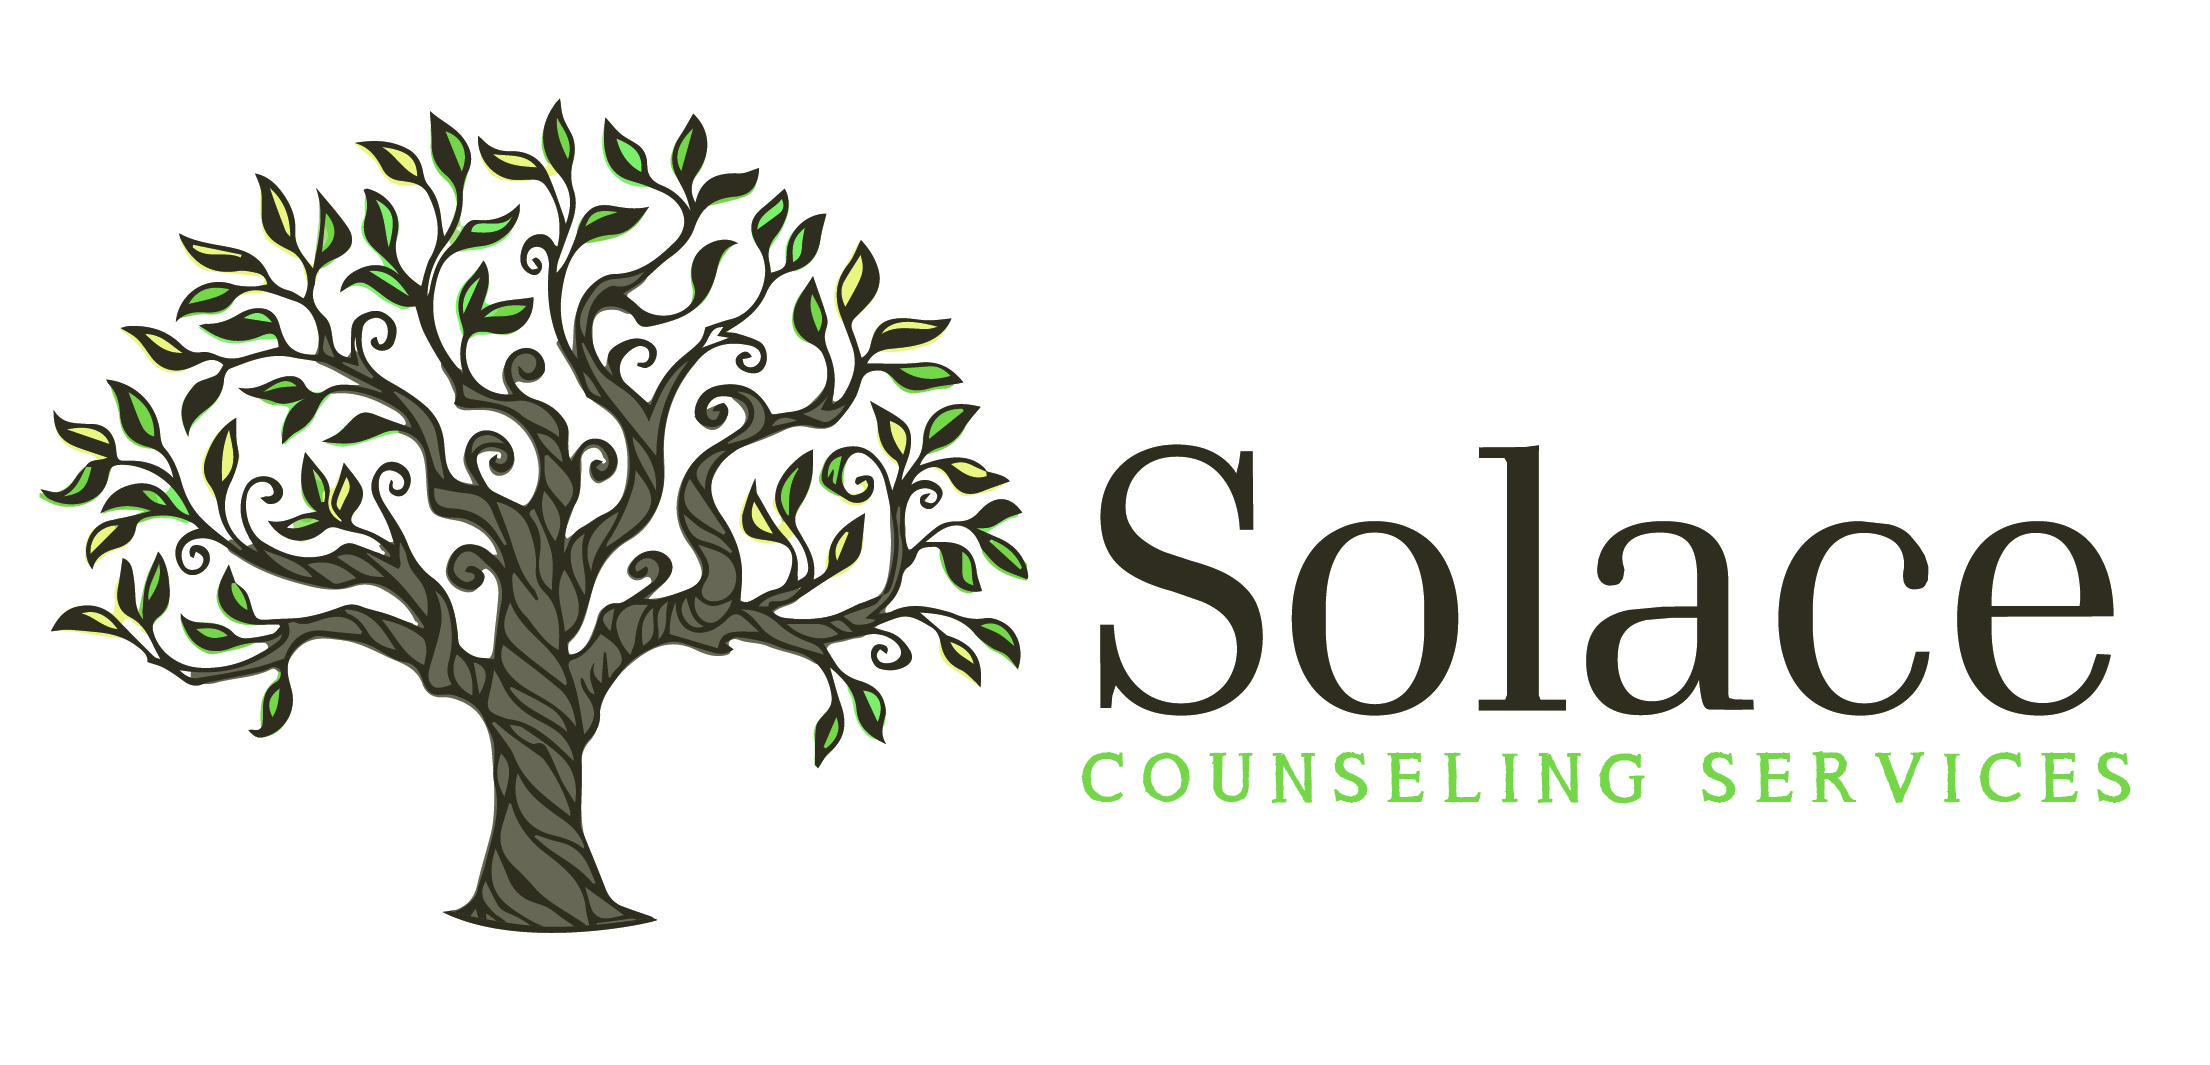 Solace Counseling Services